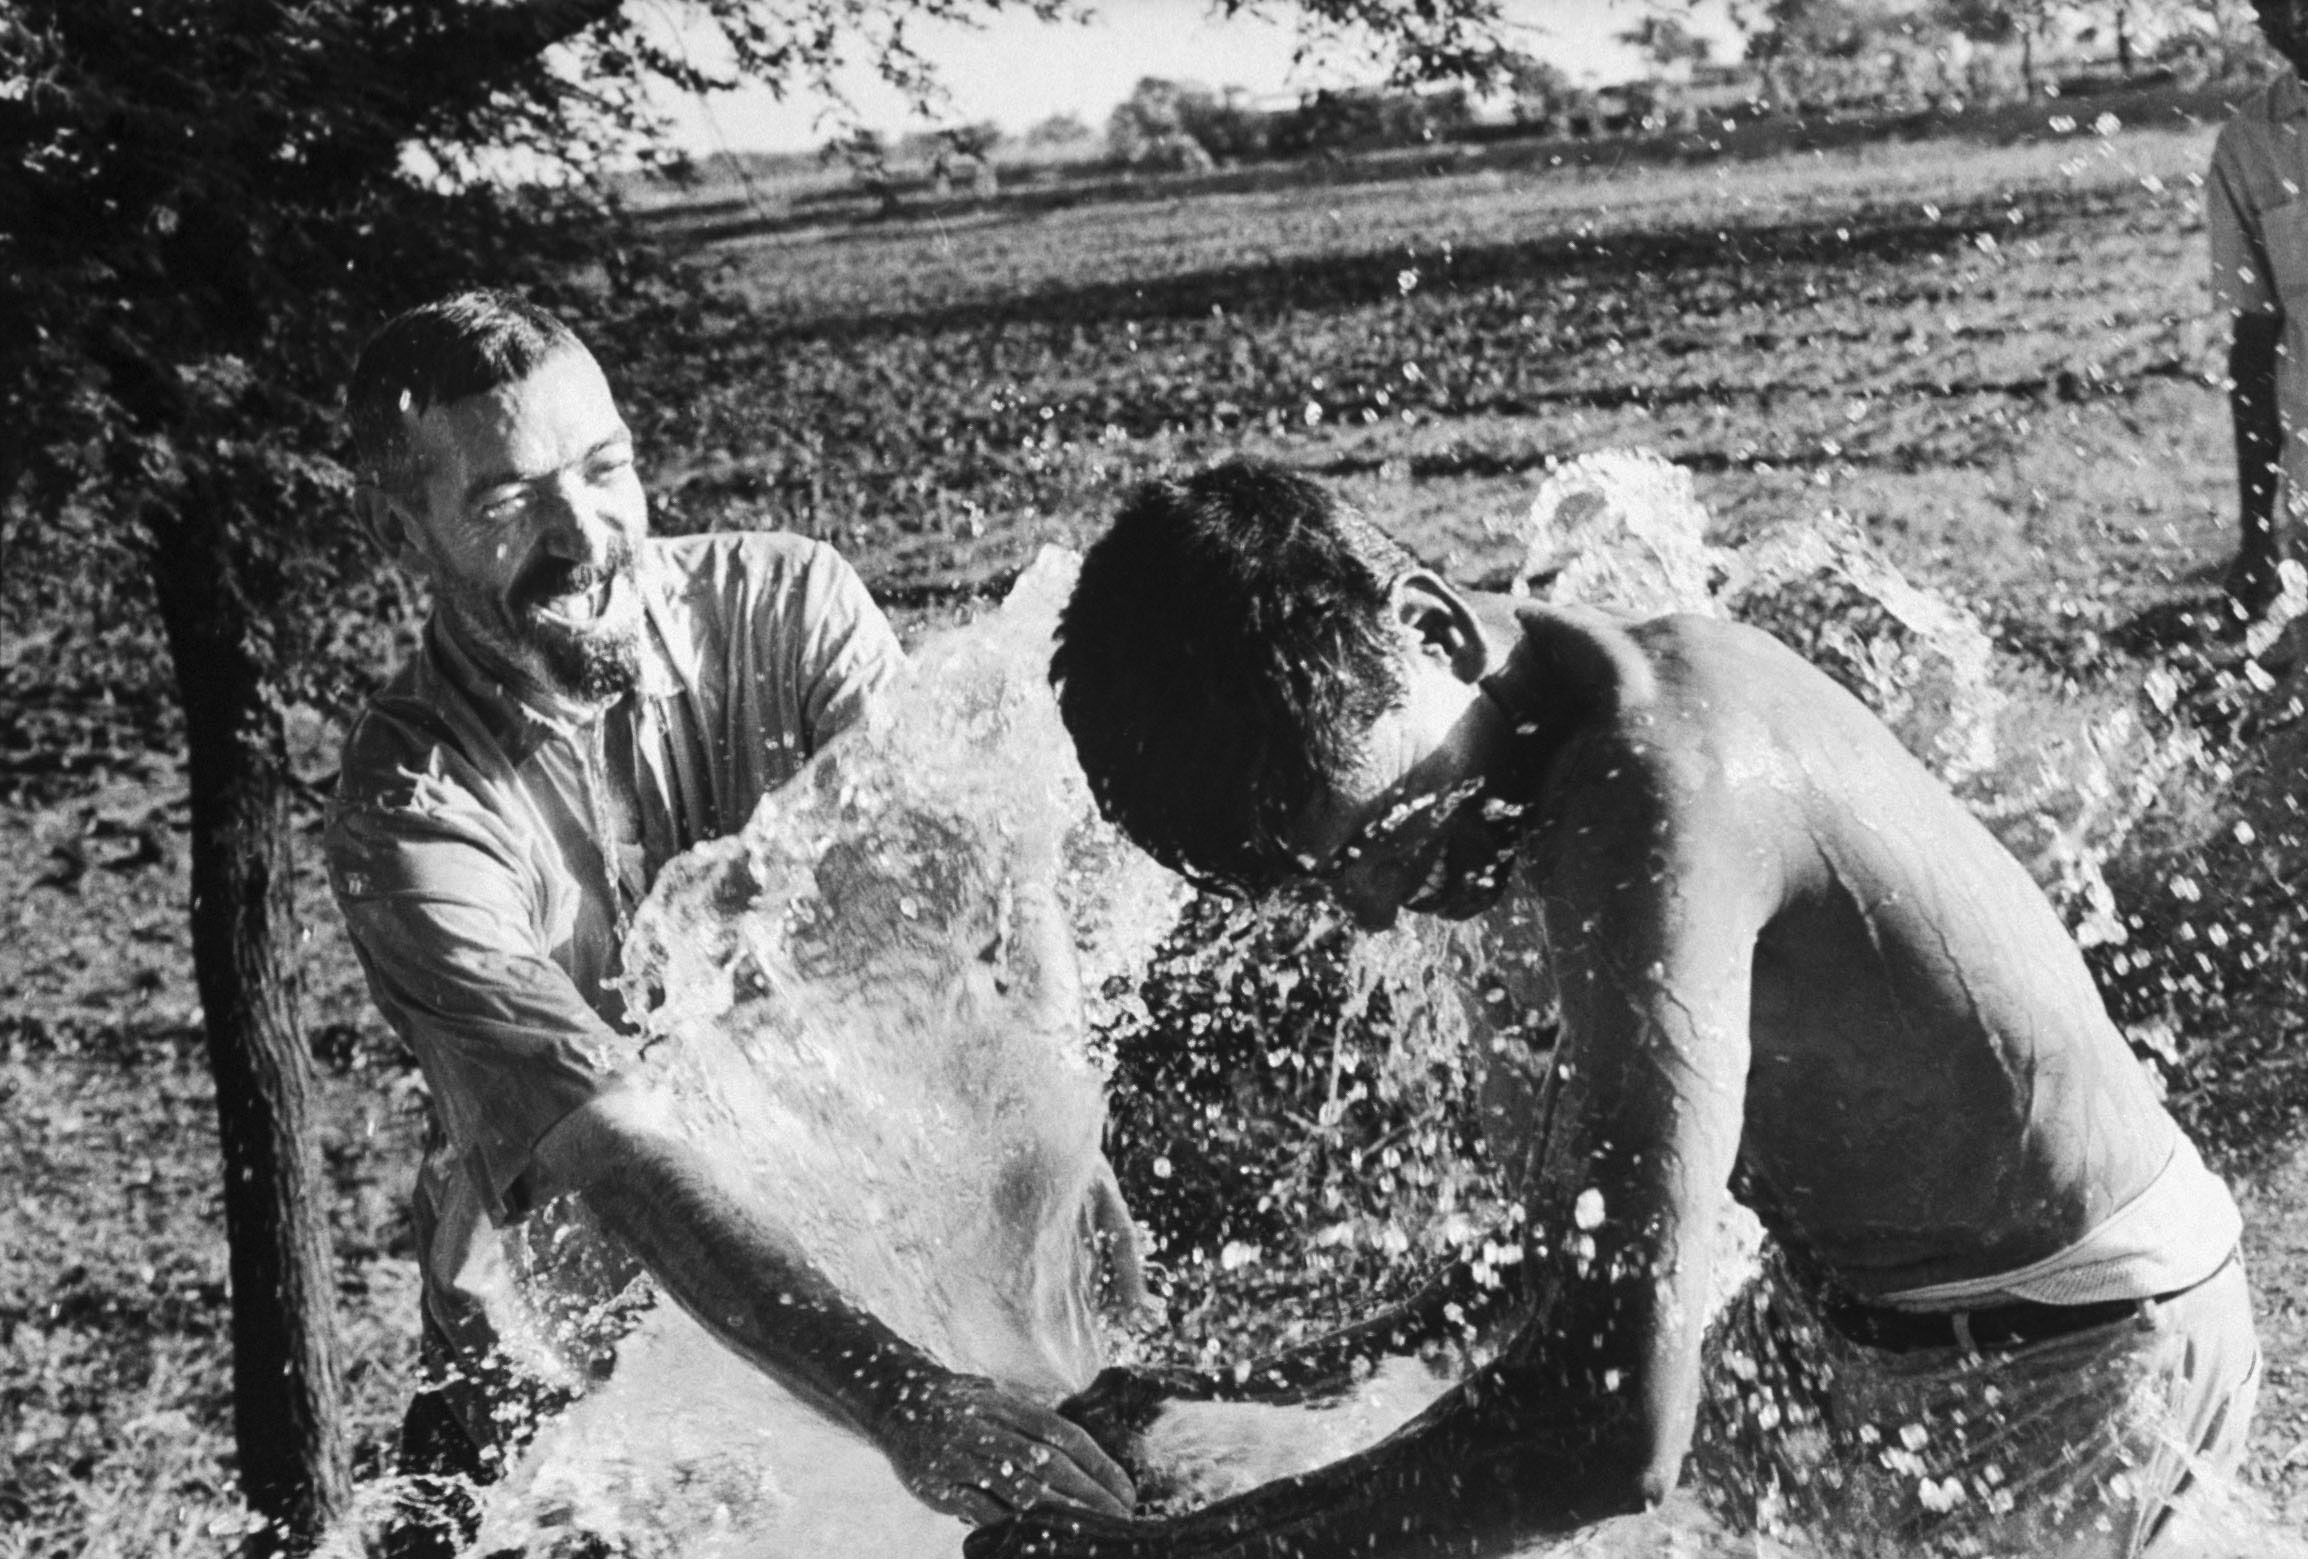 Missionary priest Vincent Ferrer (left) and assistant Mahadev (right) splash in water from a new well on a model farm in India in 1968.